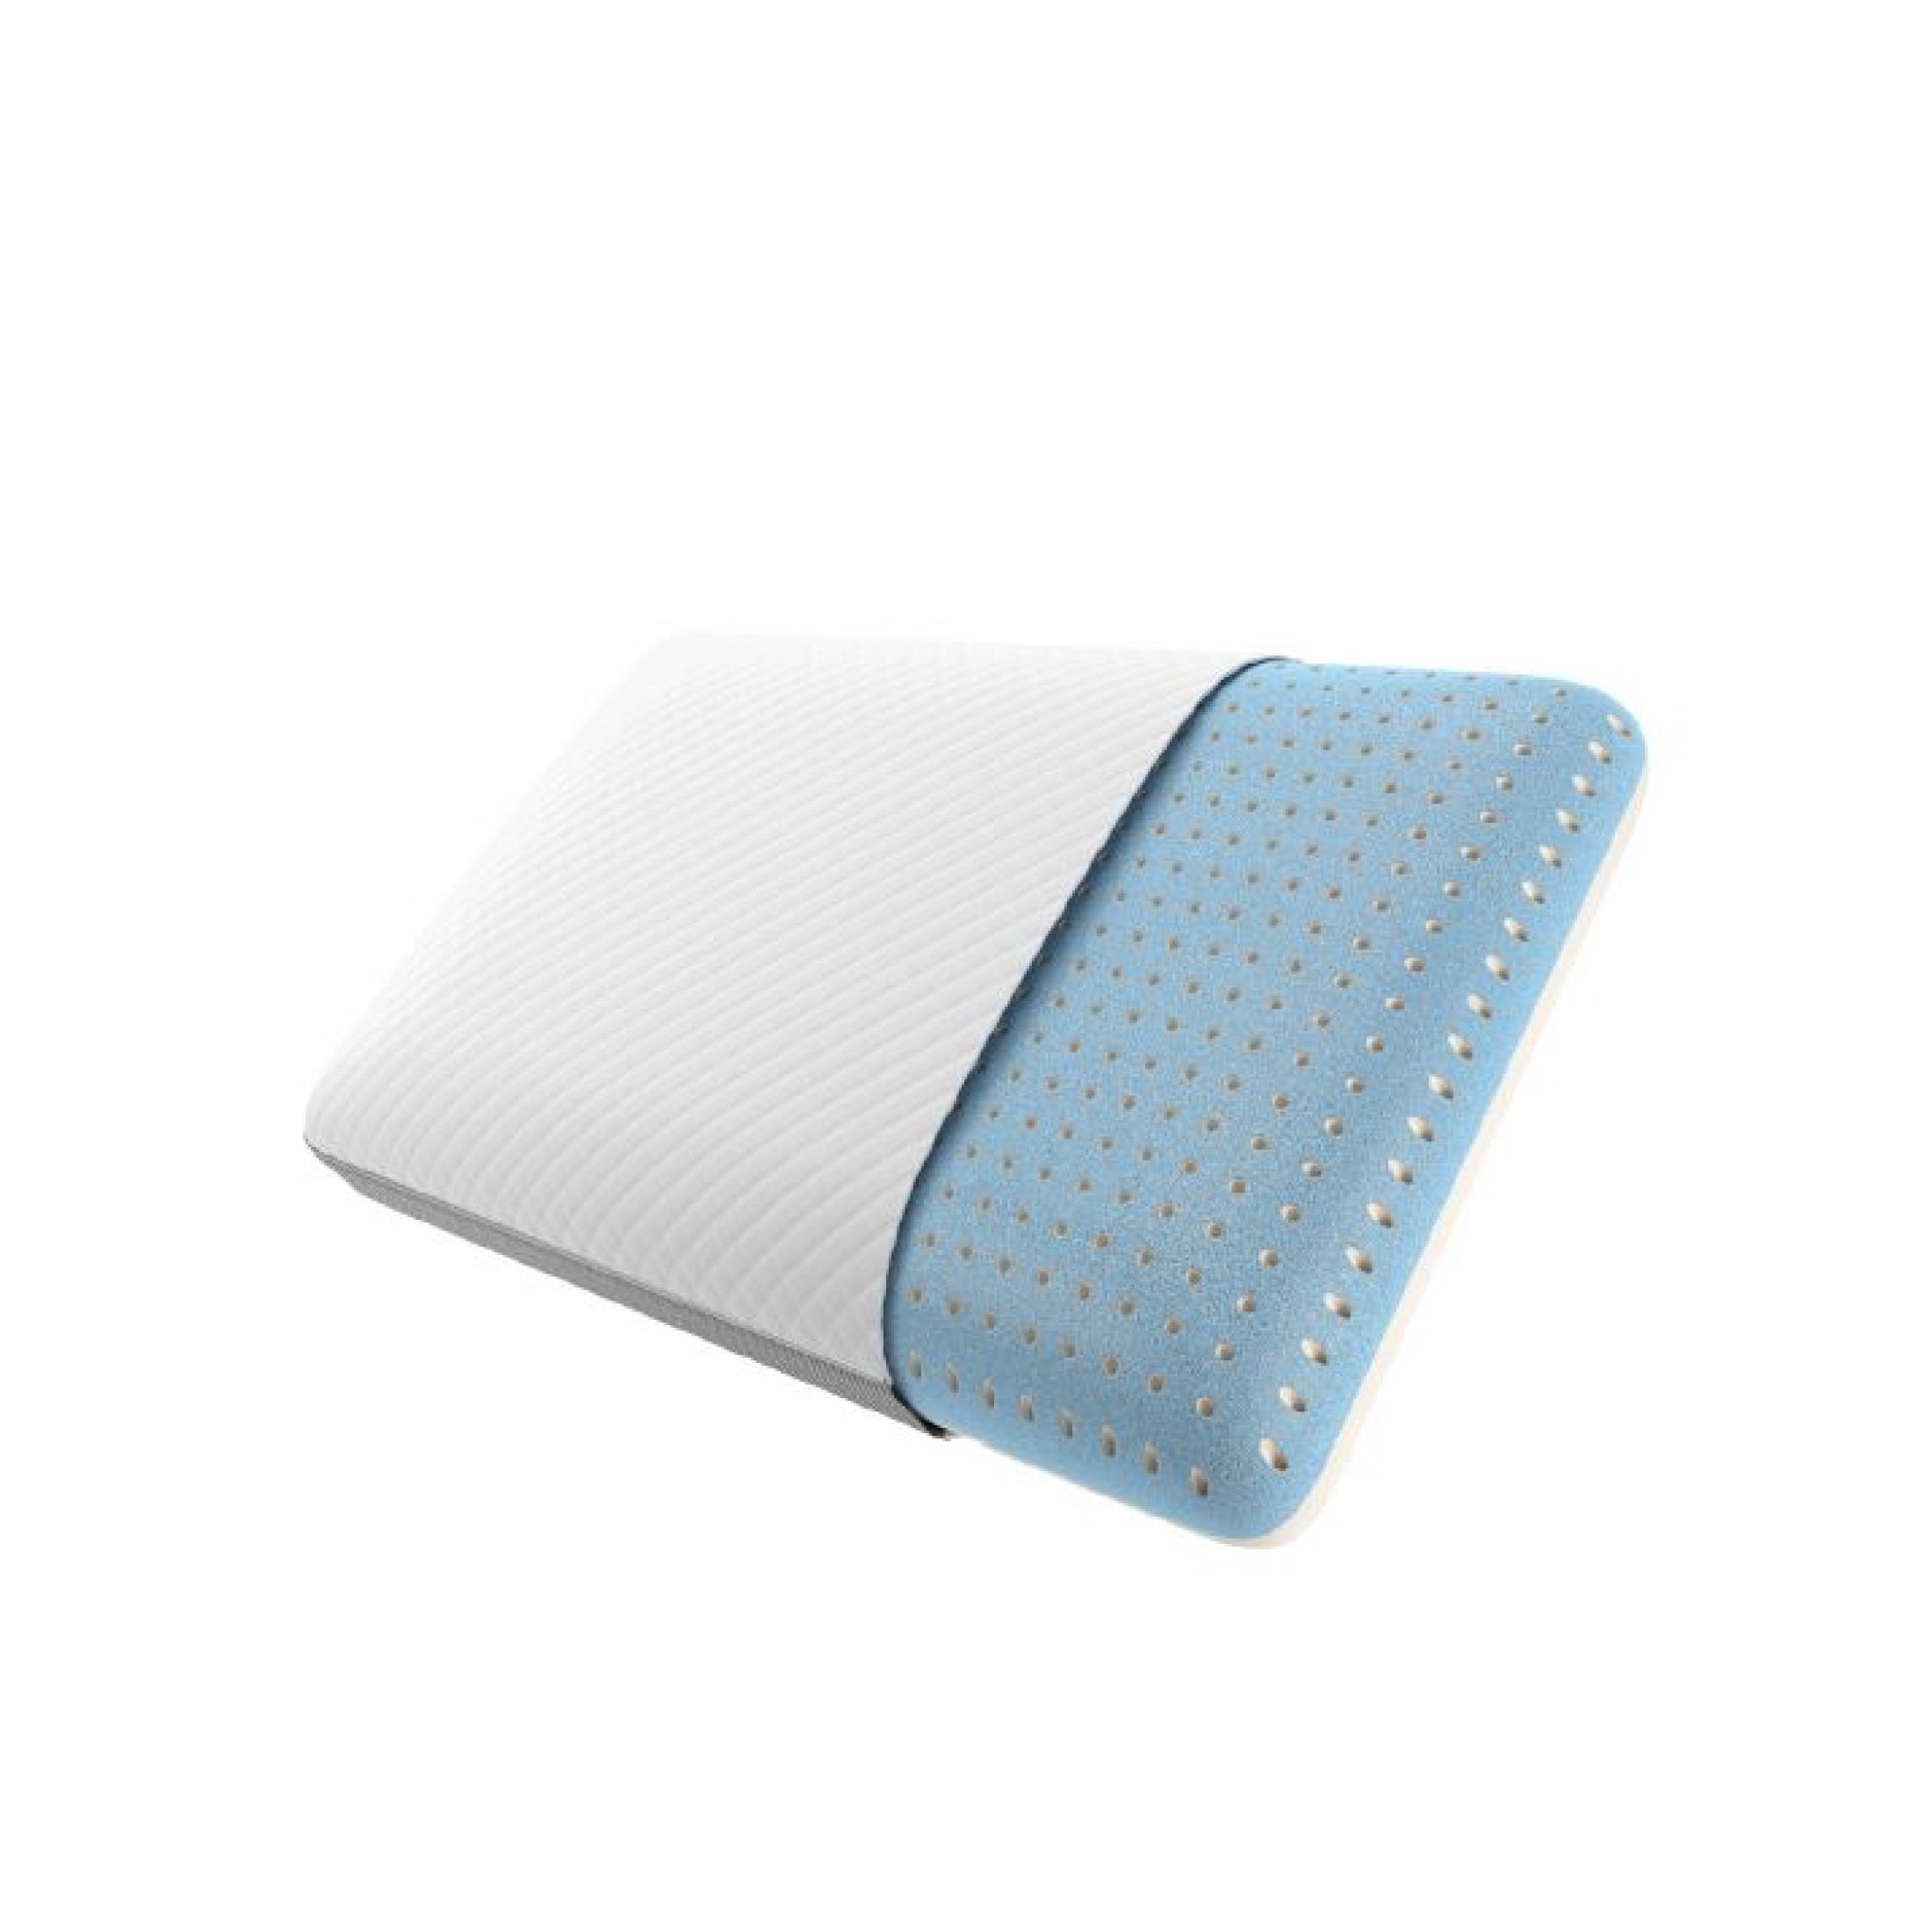 These Memory Foam Pillows Are on Sale at